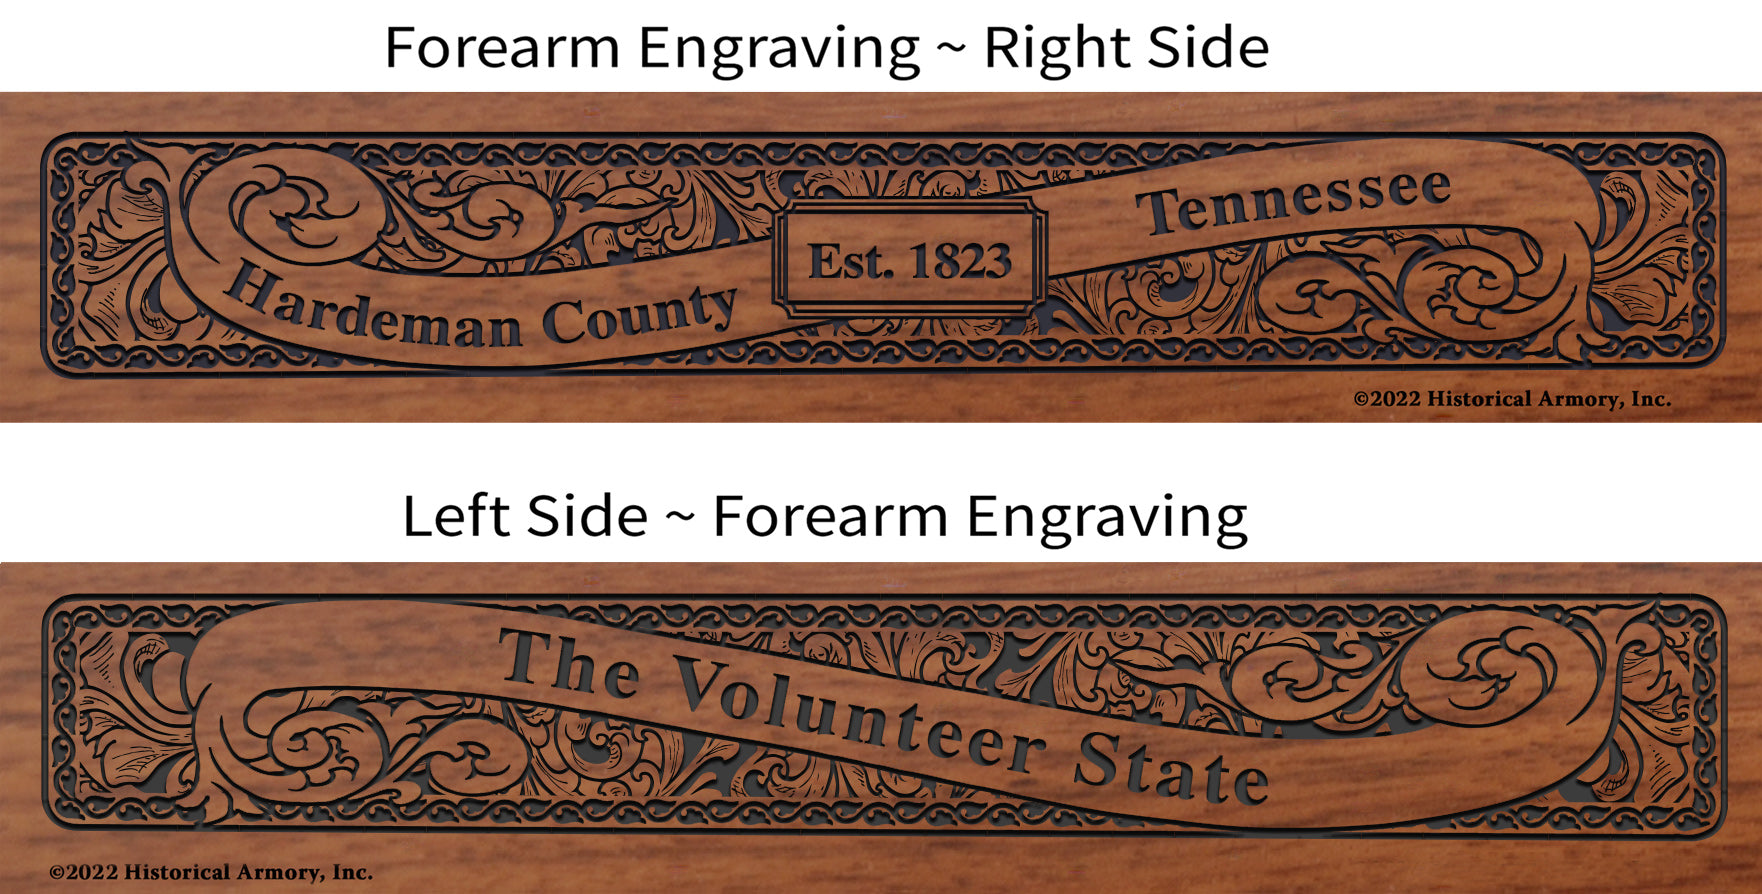 Hardeman County Tennessee Engraved Rifle Forearm